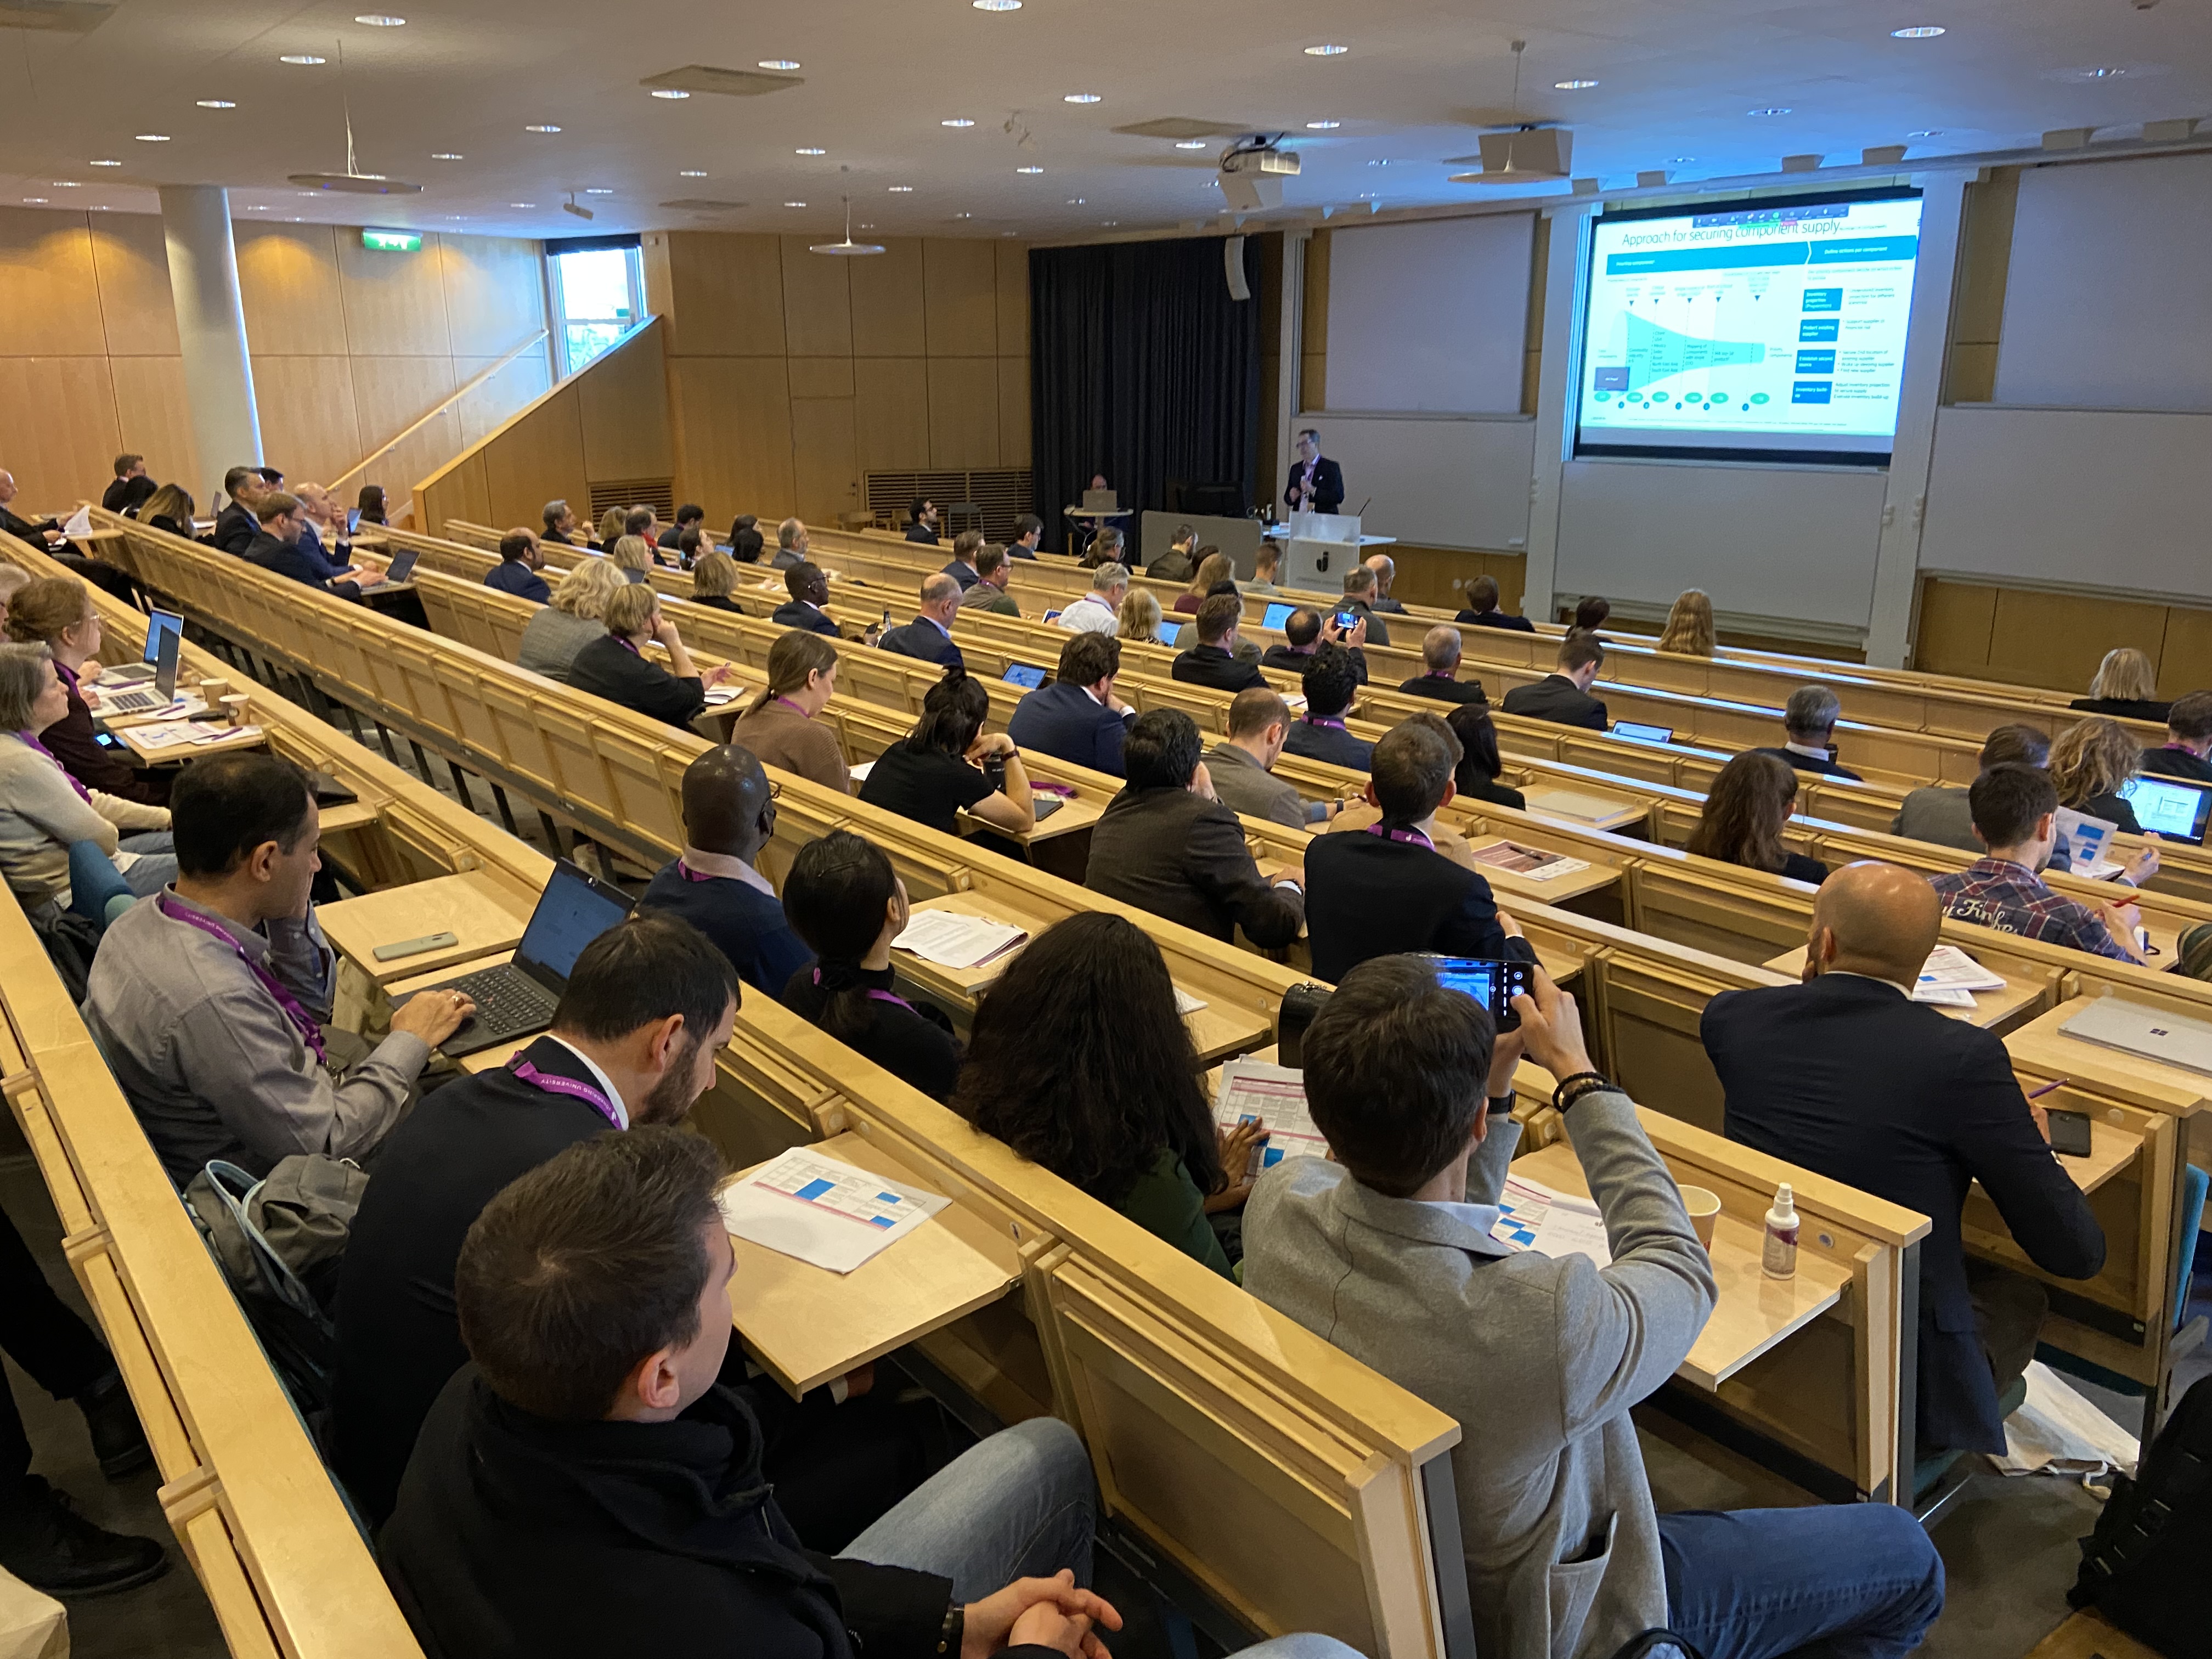 Participants of the IPSERA conference at Jönköping University.